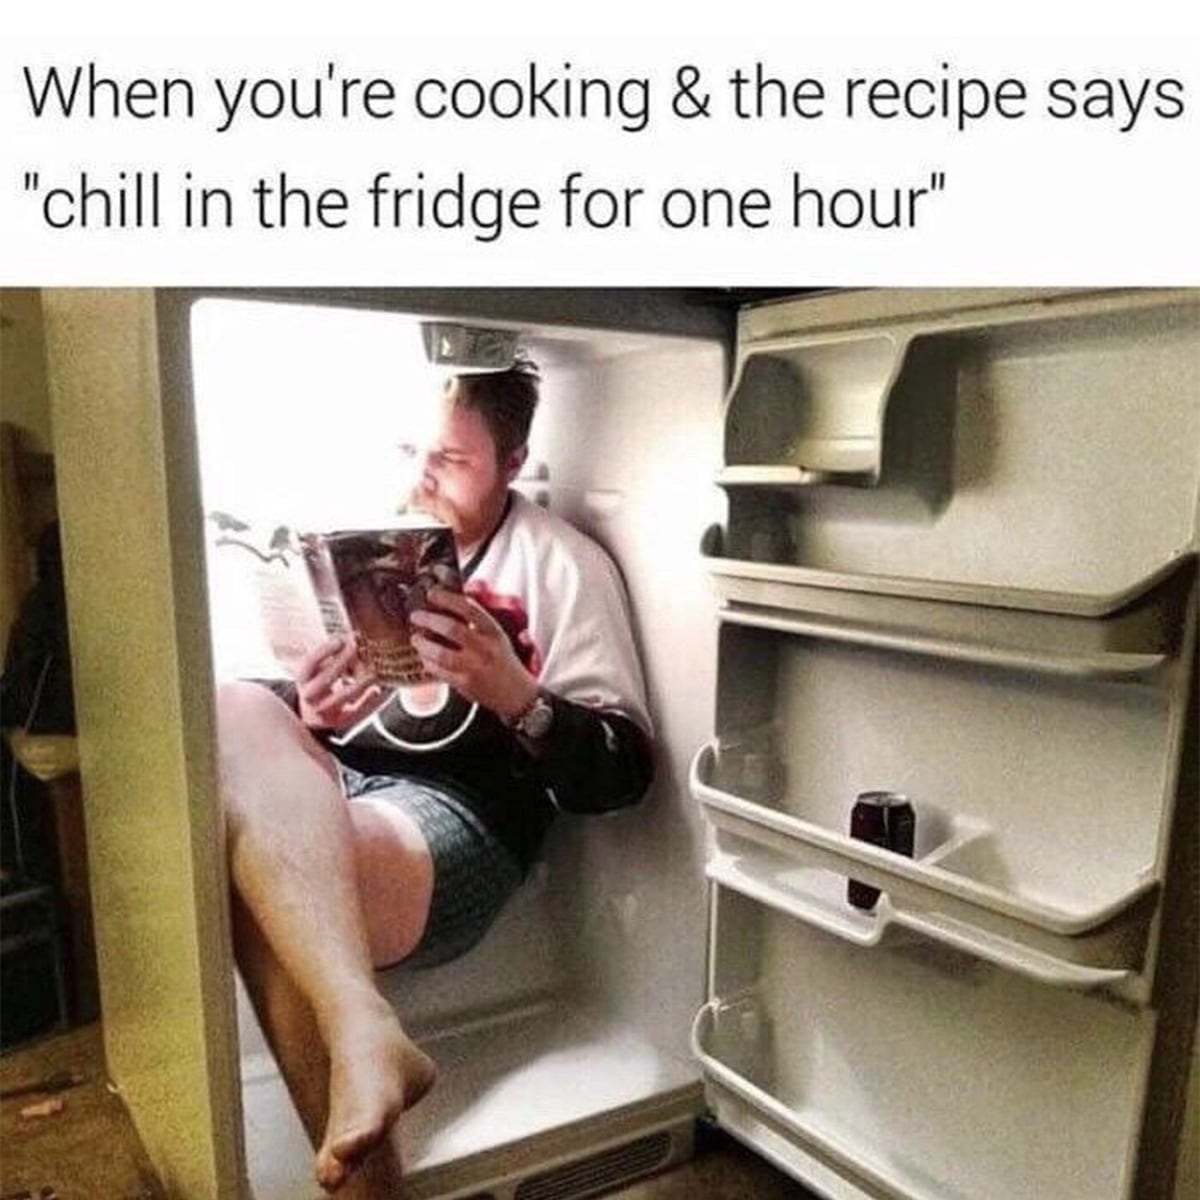 When You're cooking & the recipe says chill in the fridge for one hour.